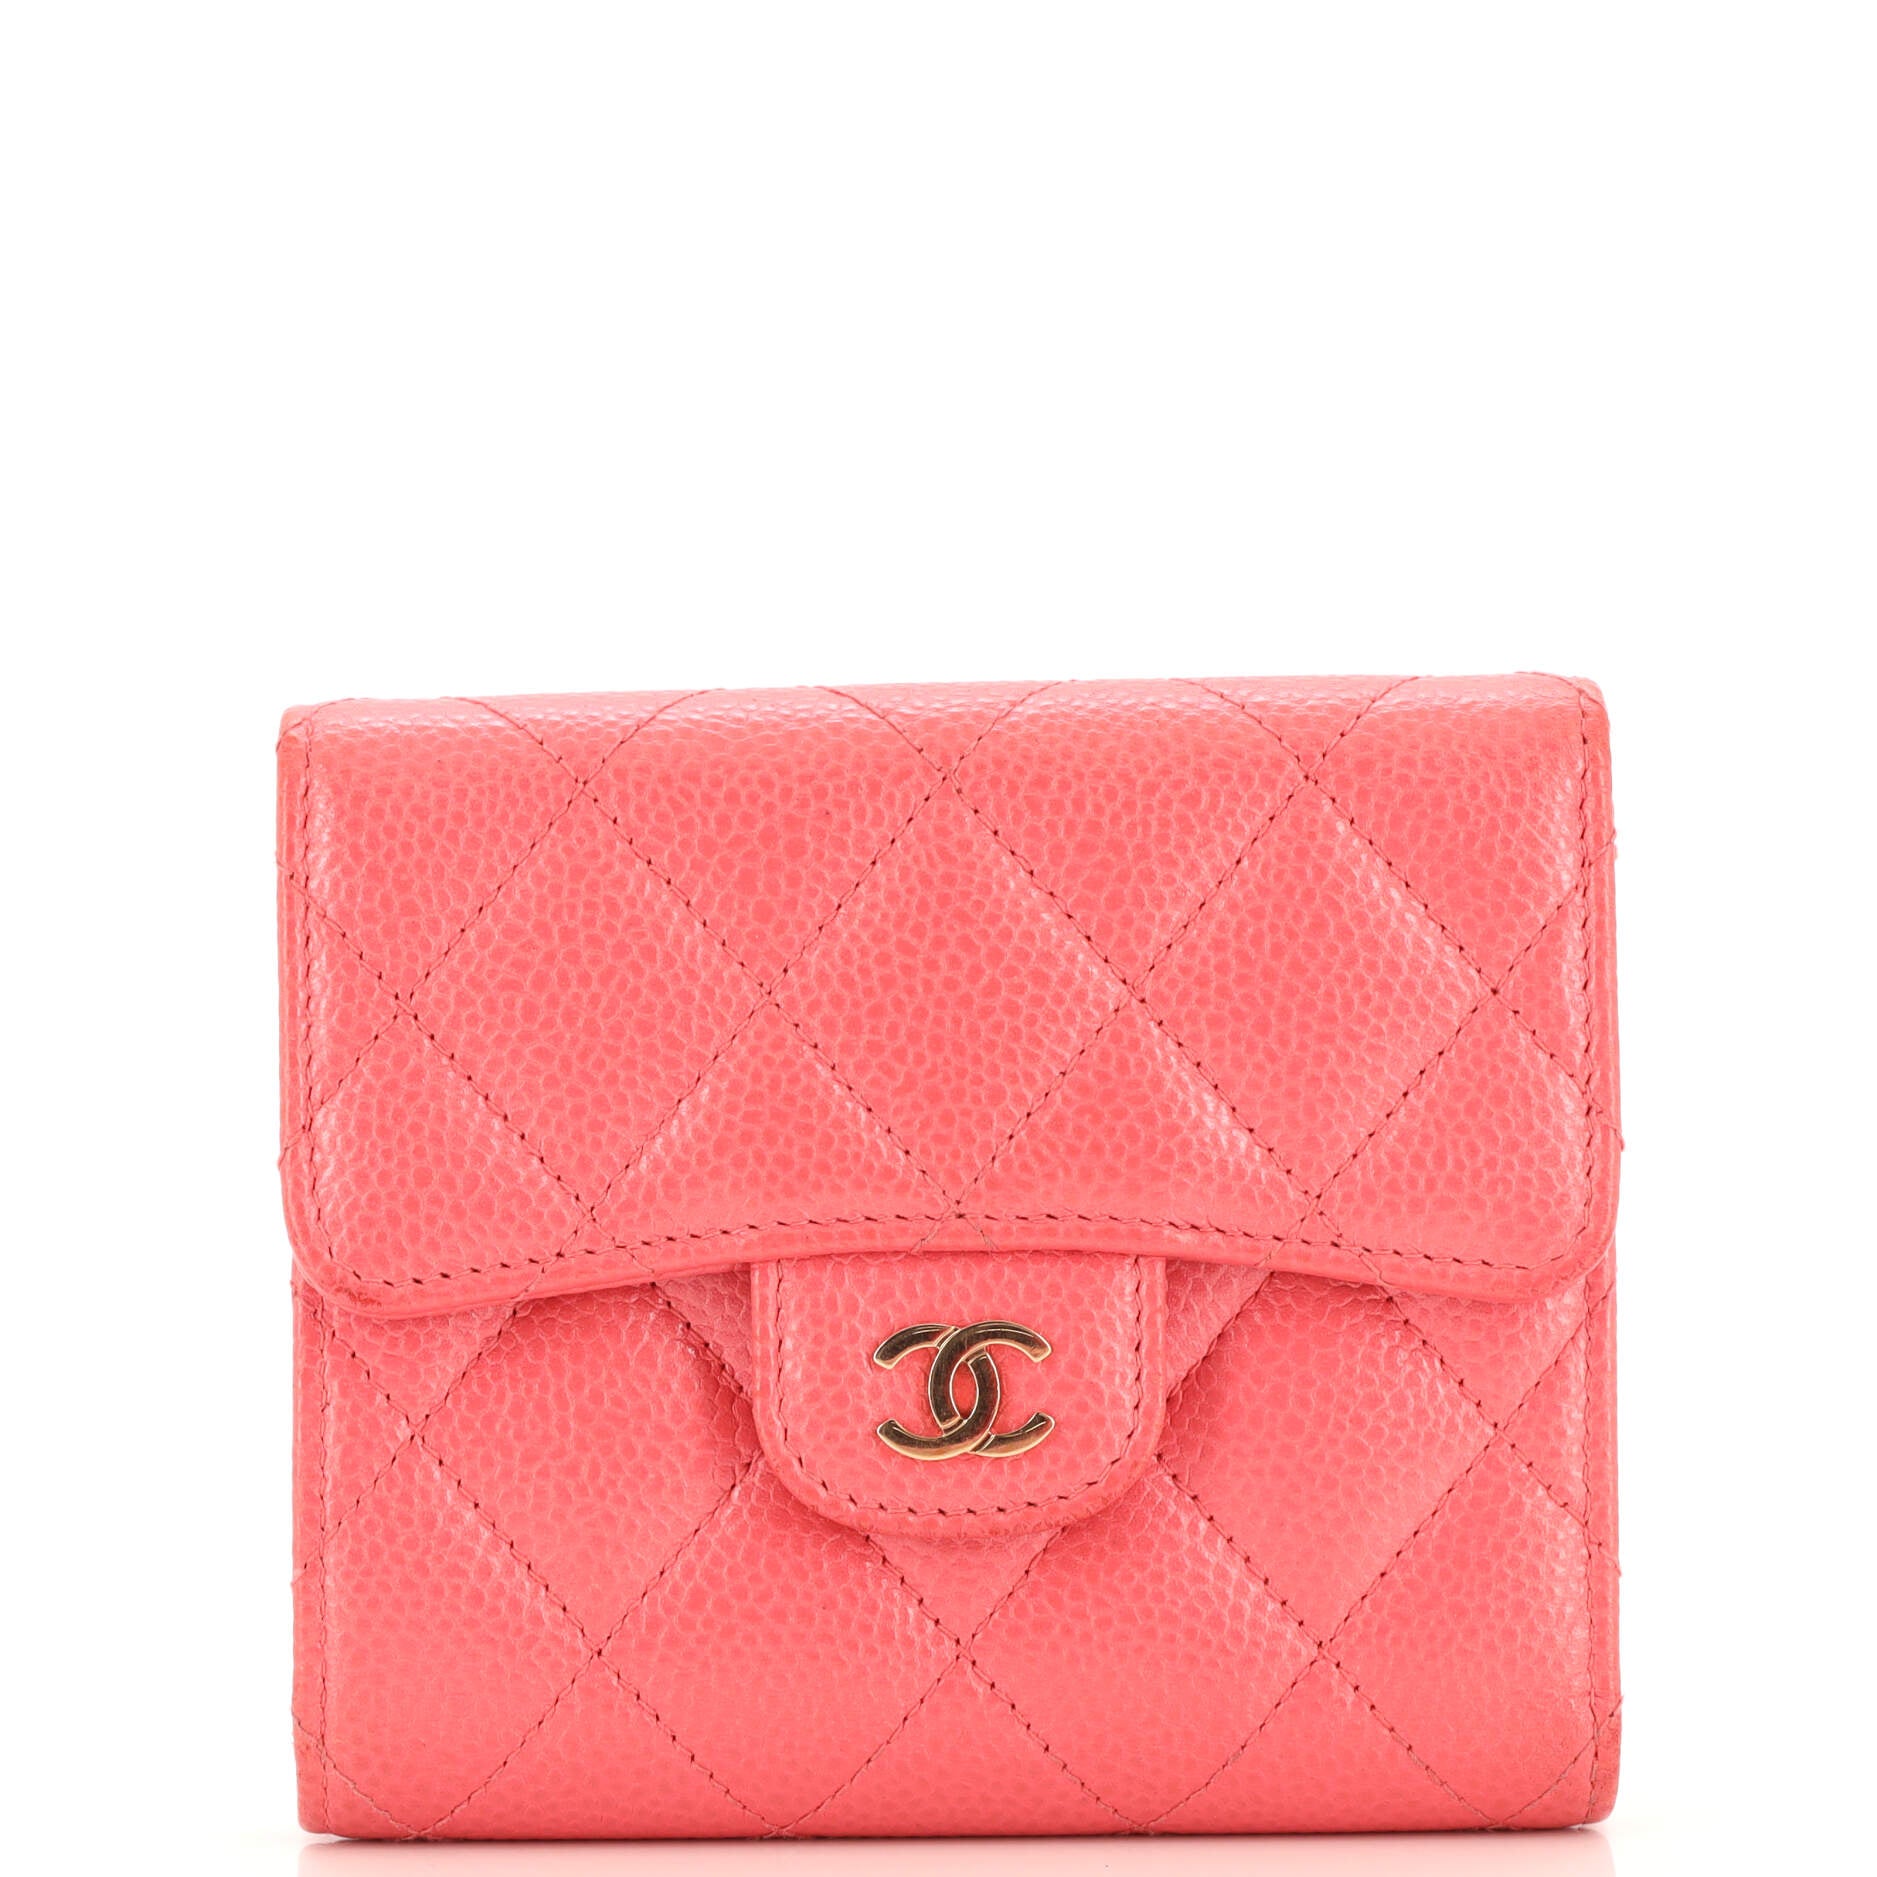 CC Compact Classic Flap Wallet Quilted Caviar